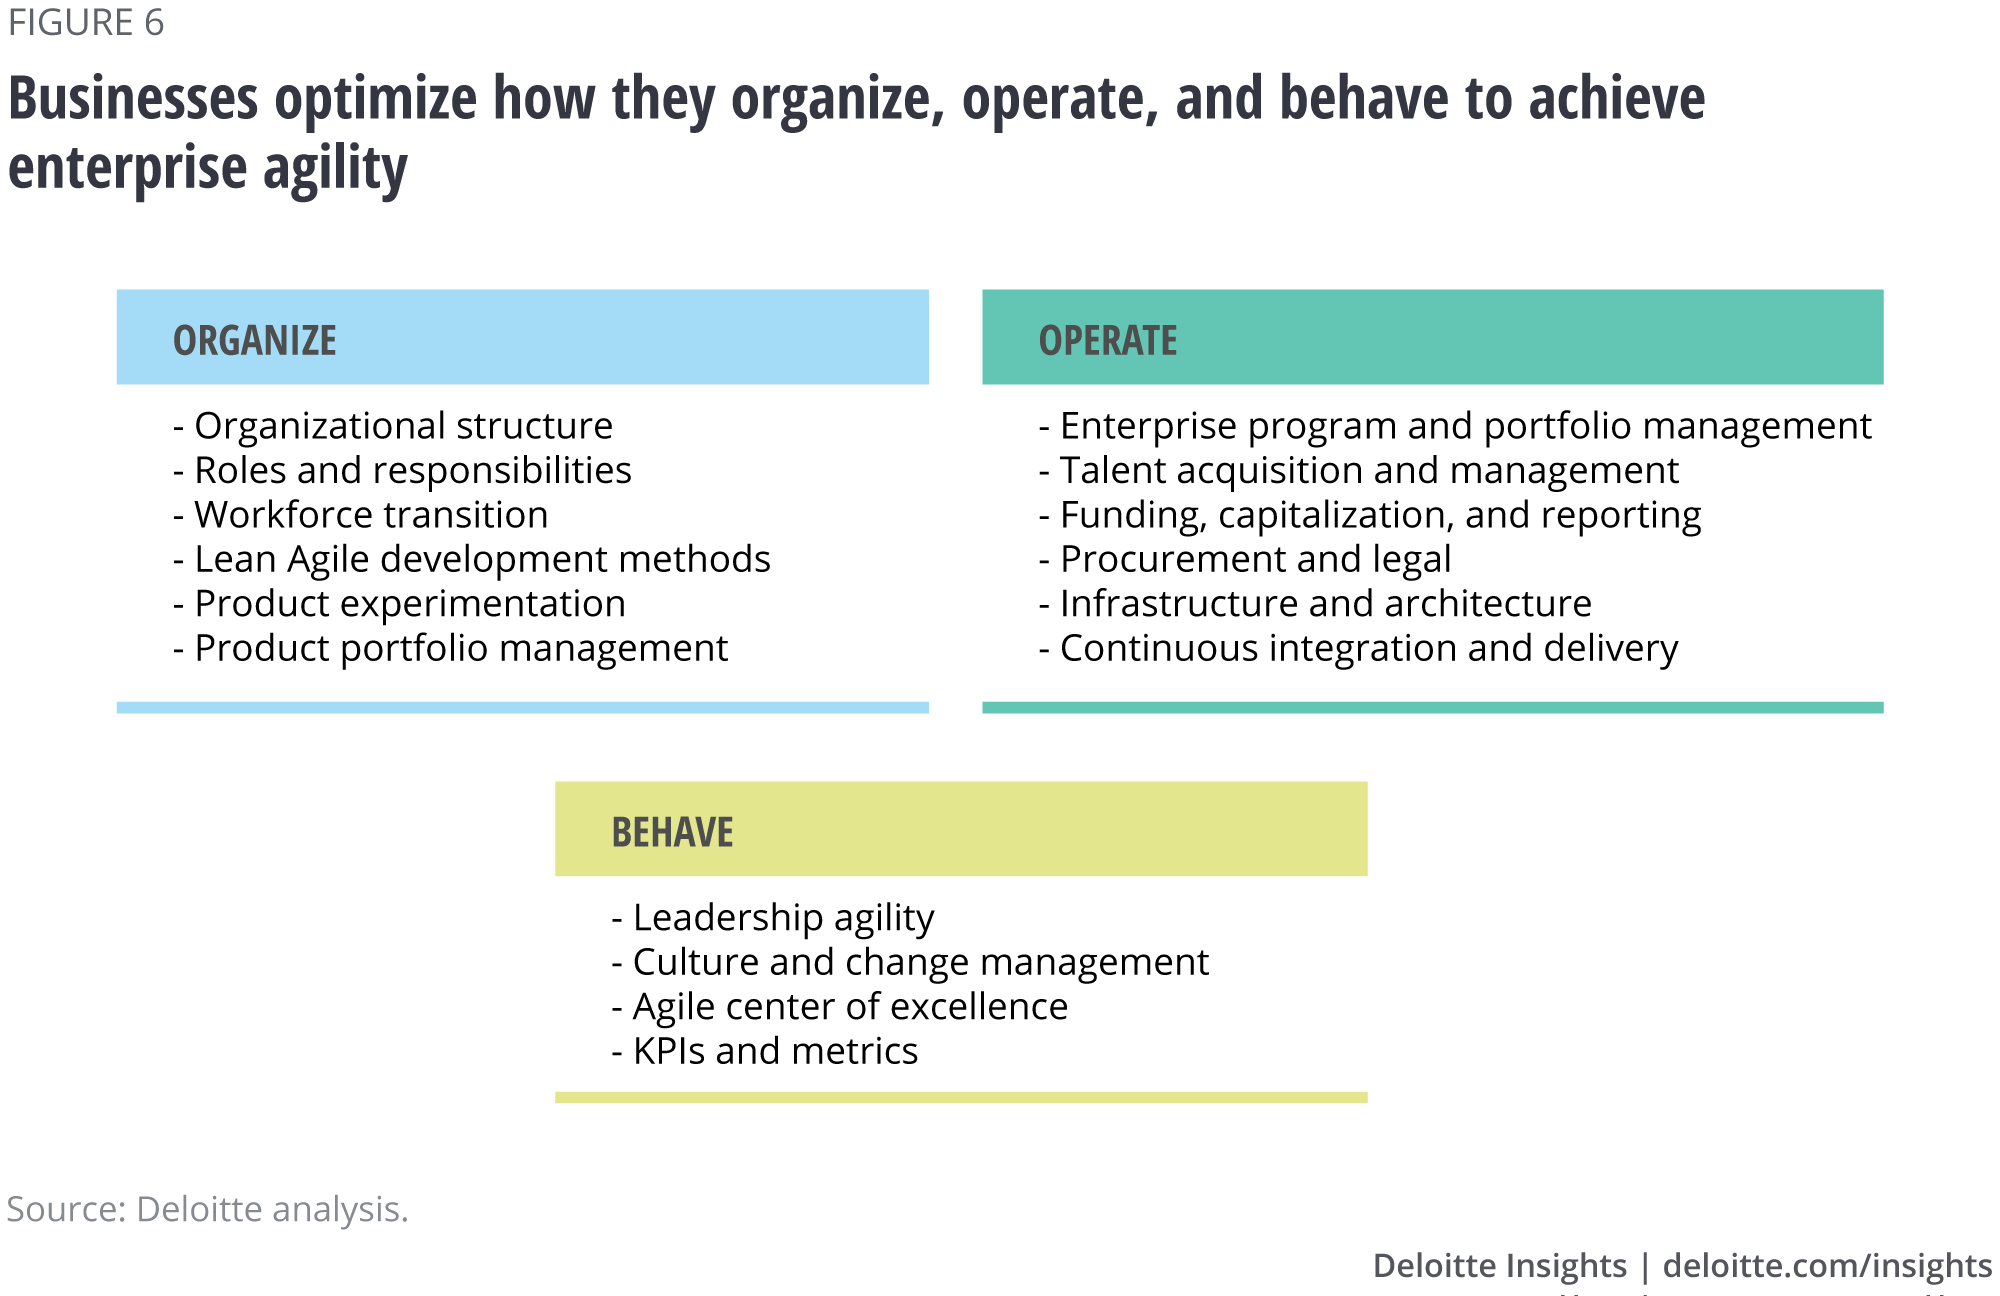 Businesses optimize how they organize, operate, and behave to achieve enterprise agility